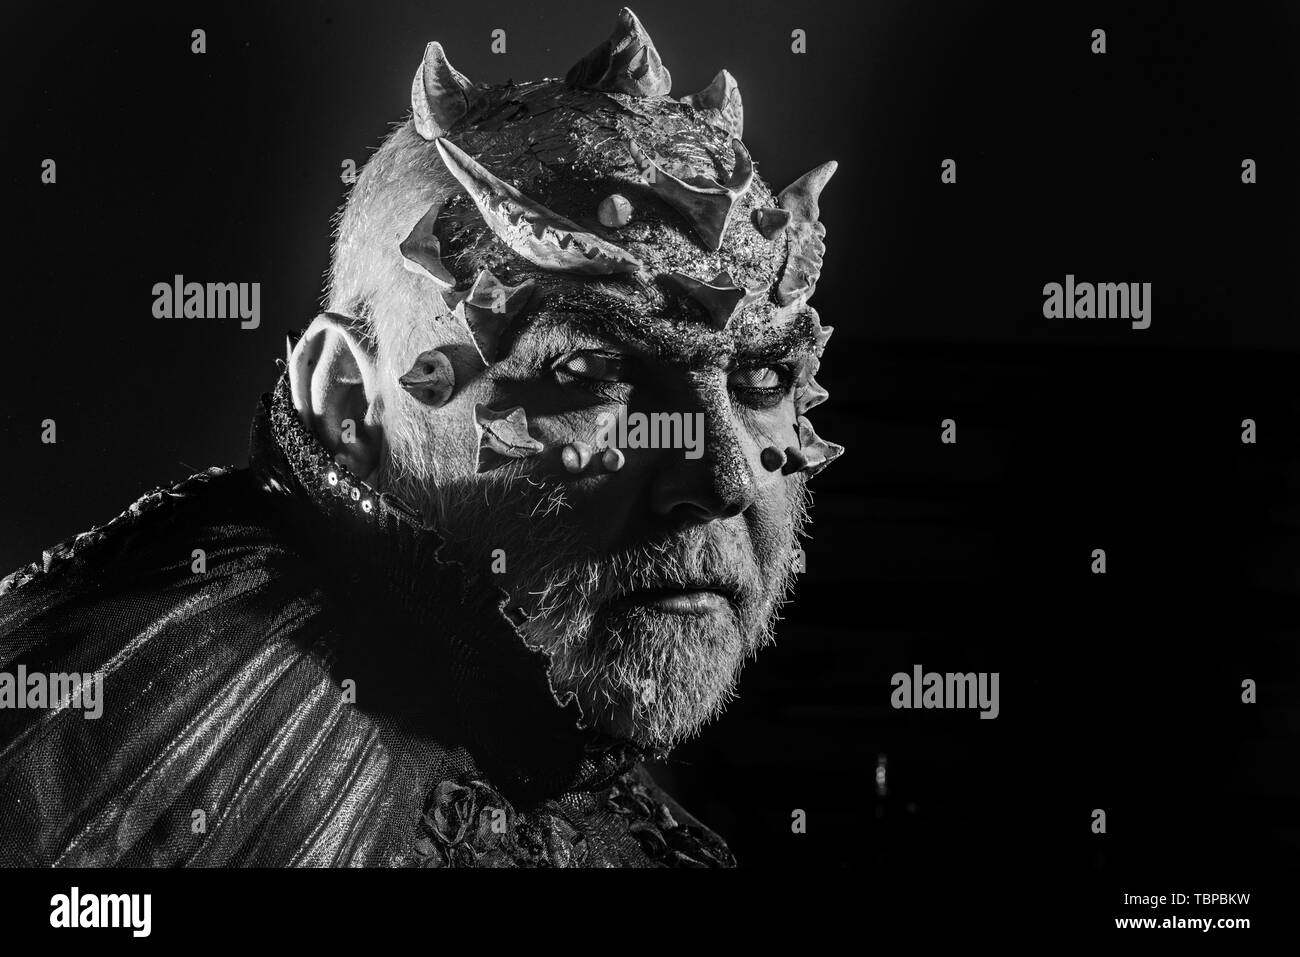 Demon with golden collar on black background. Man with thorns or warts, face covered with glitters. Senior man with white beard dressed like monster Stock Photo